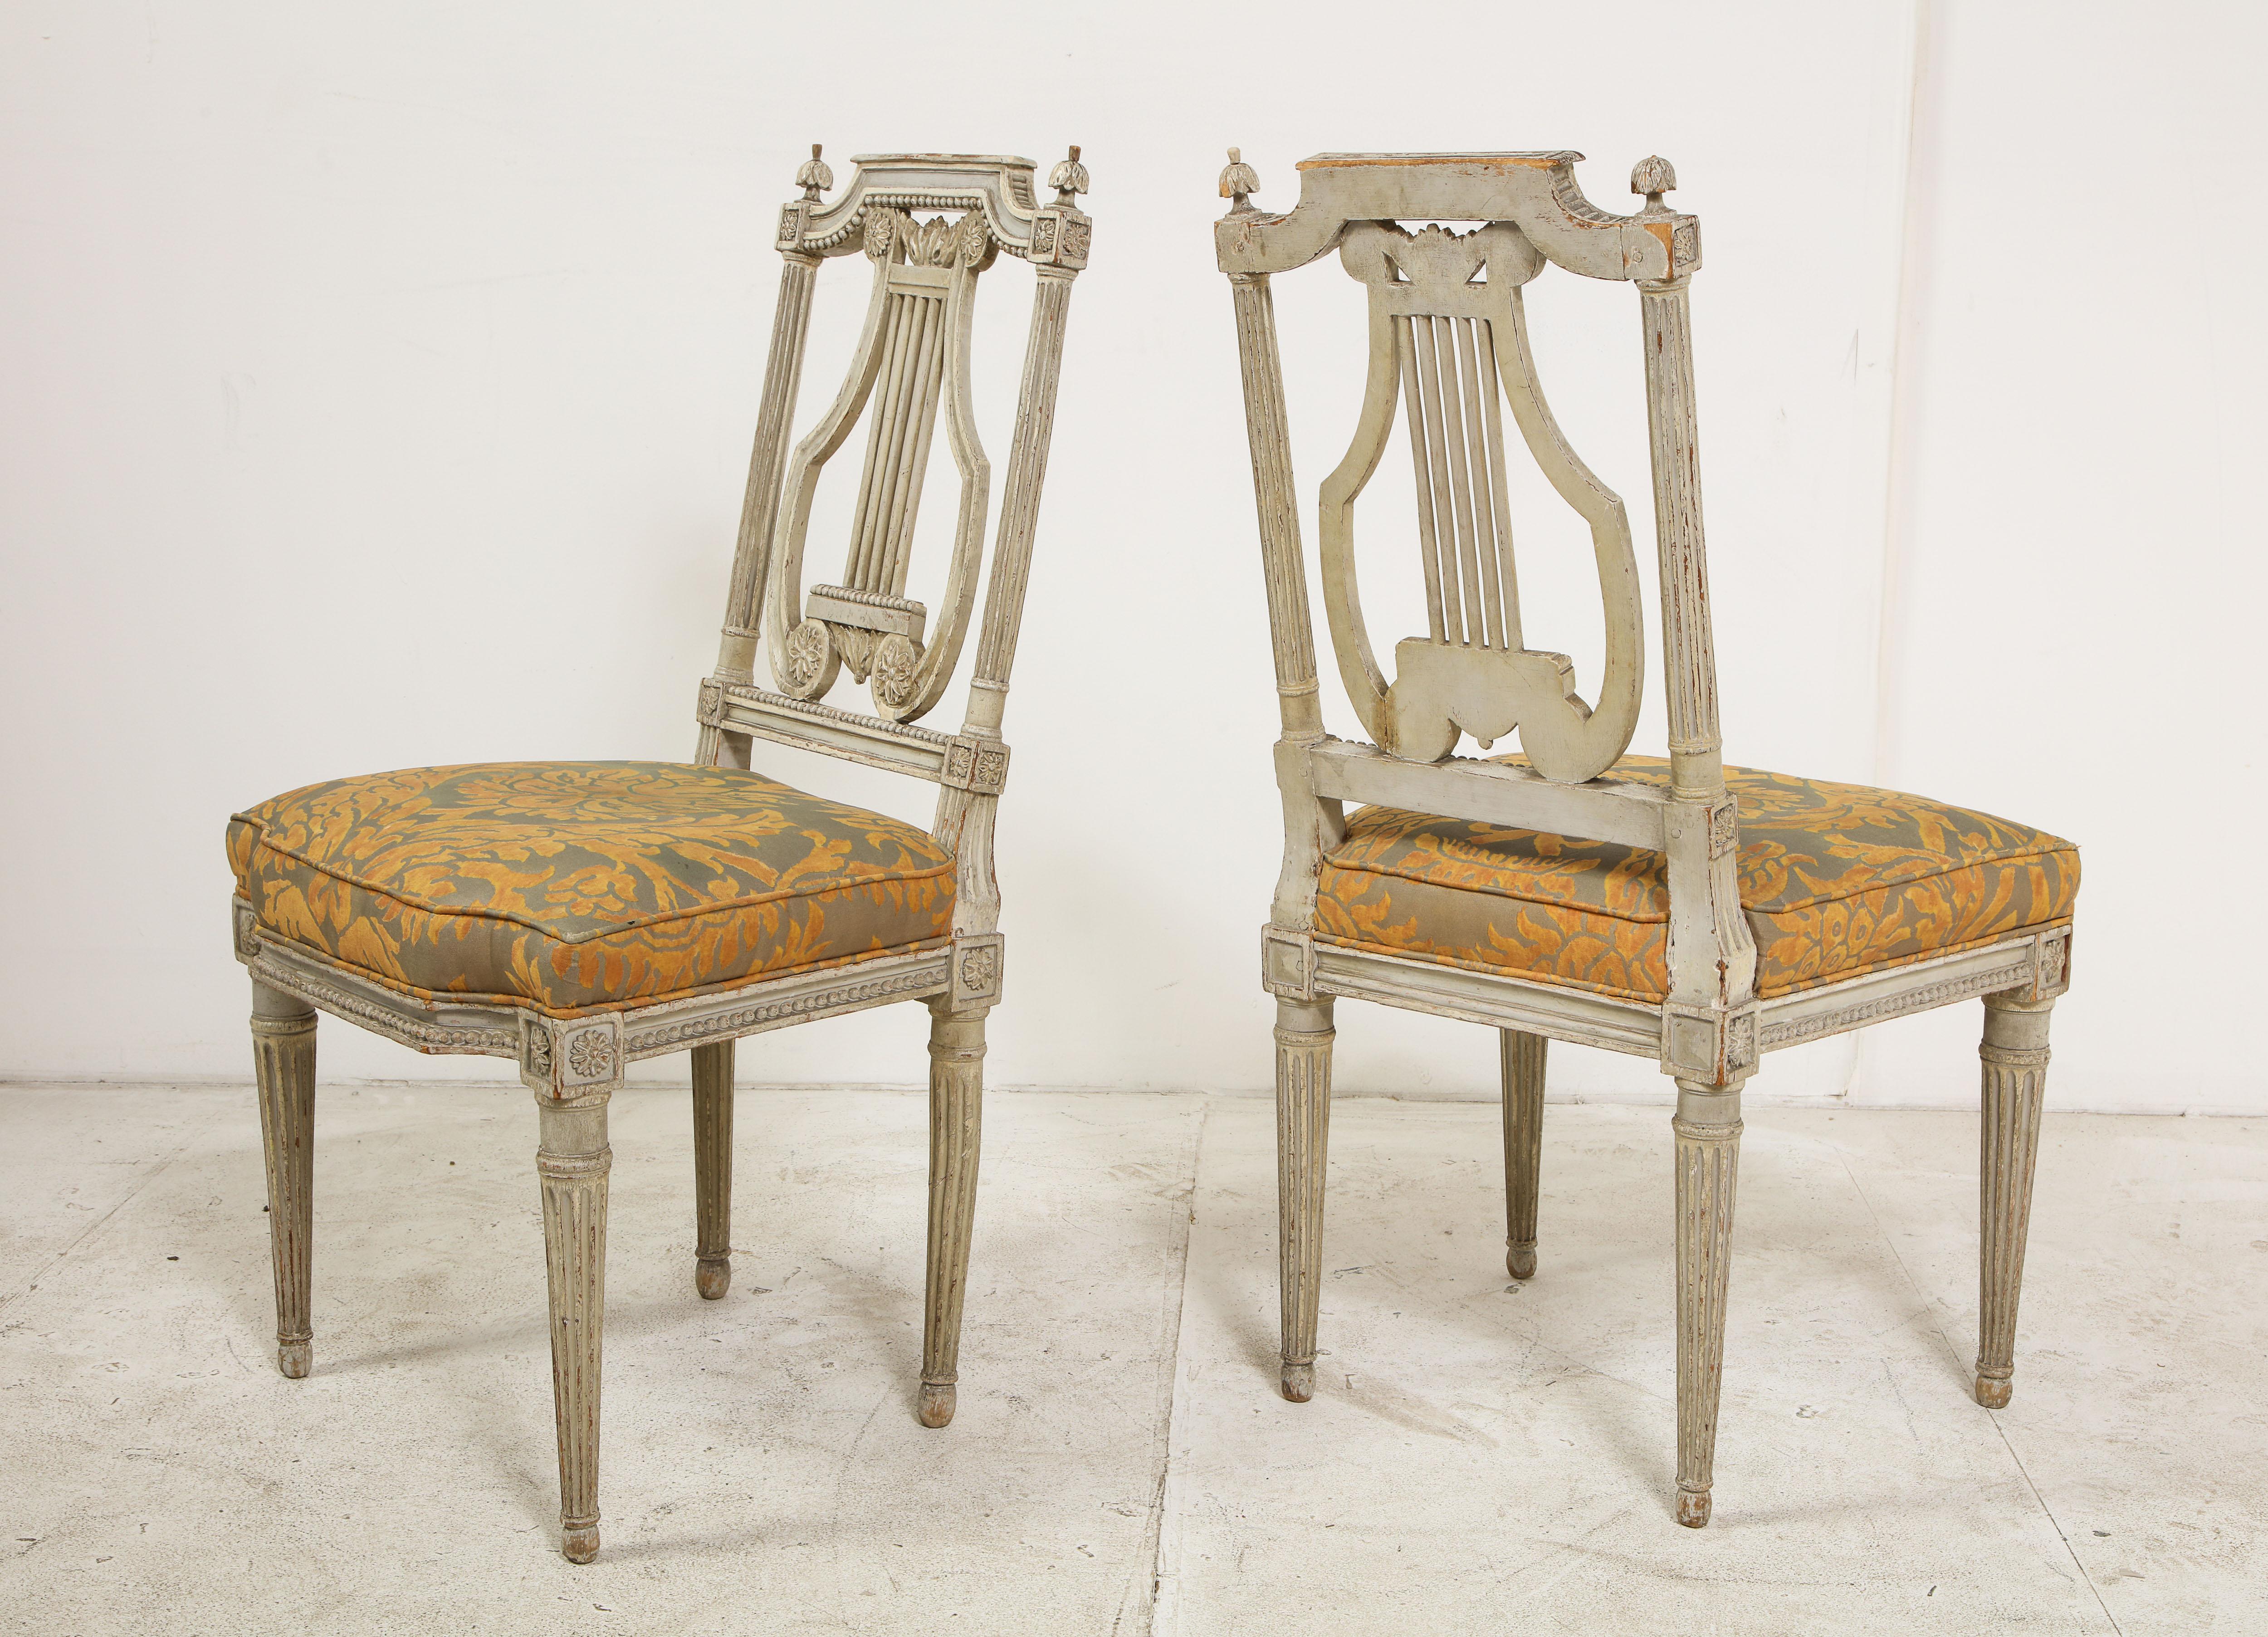 Damask Pair of 19th Century Italian Painted Lyre-Back Chairs with Fortuny Seat Cushions